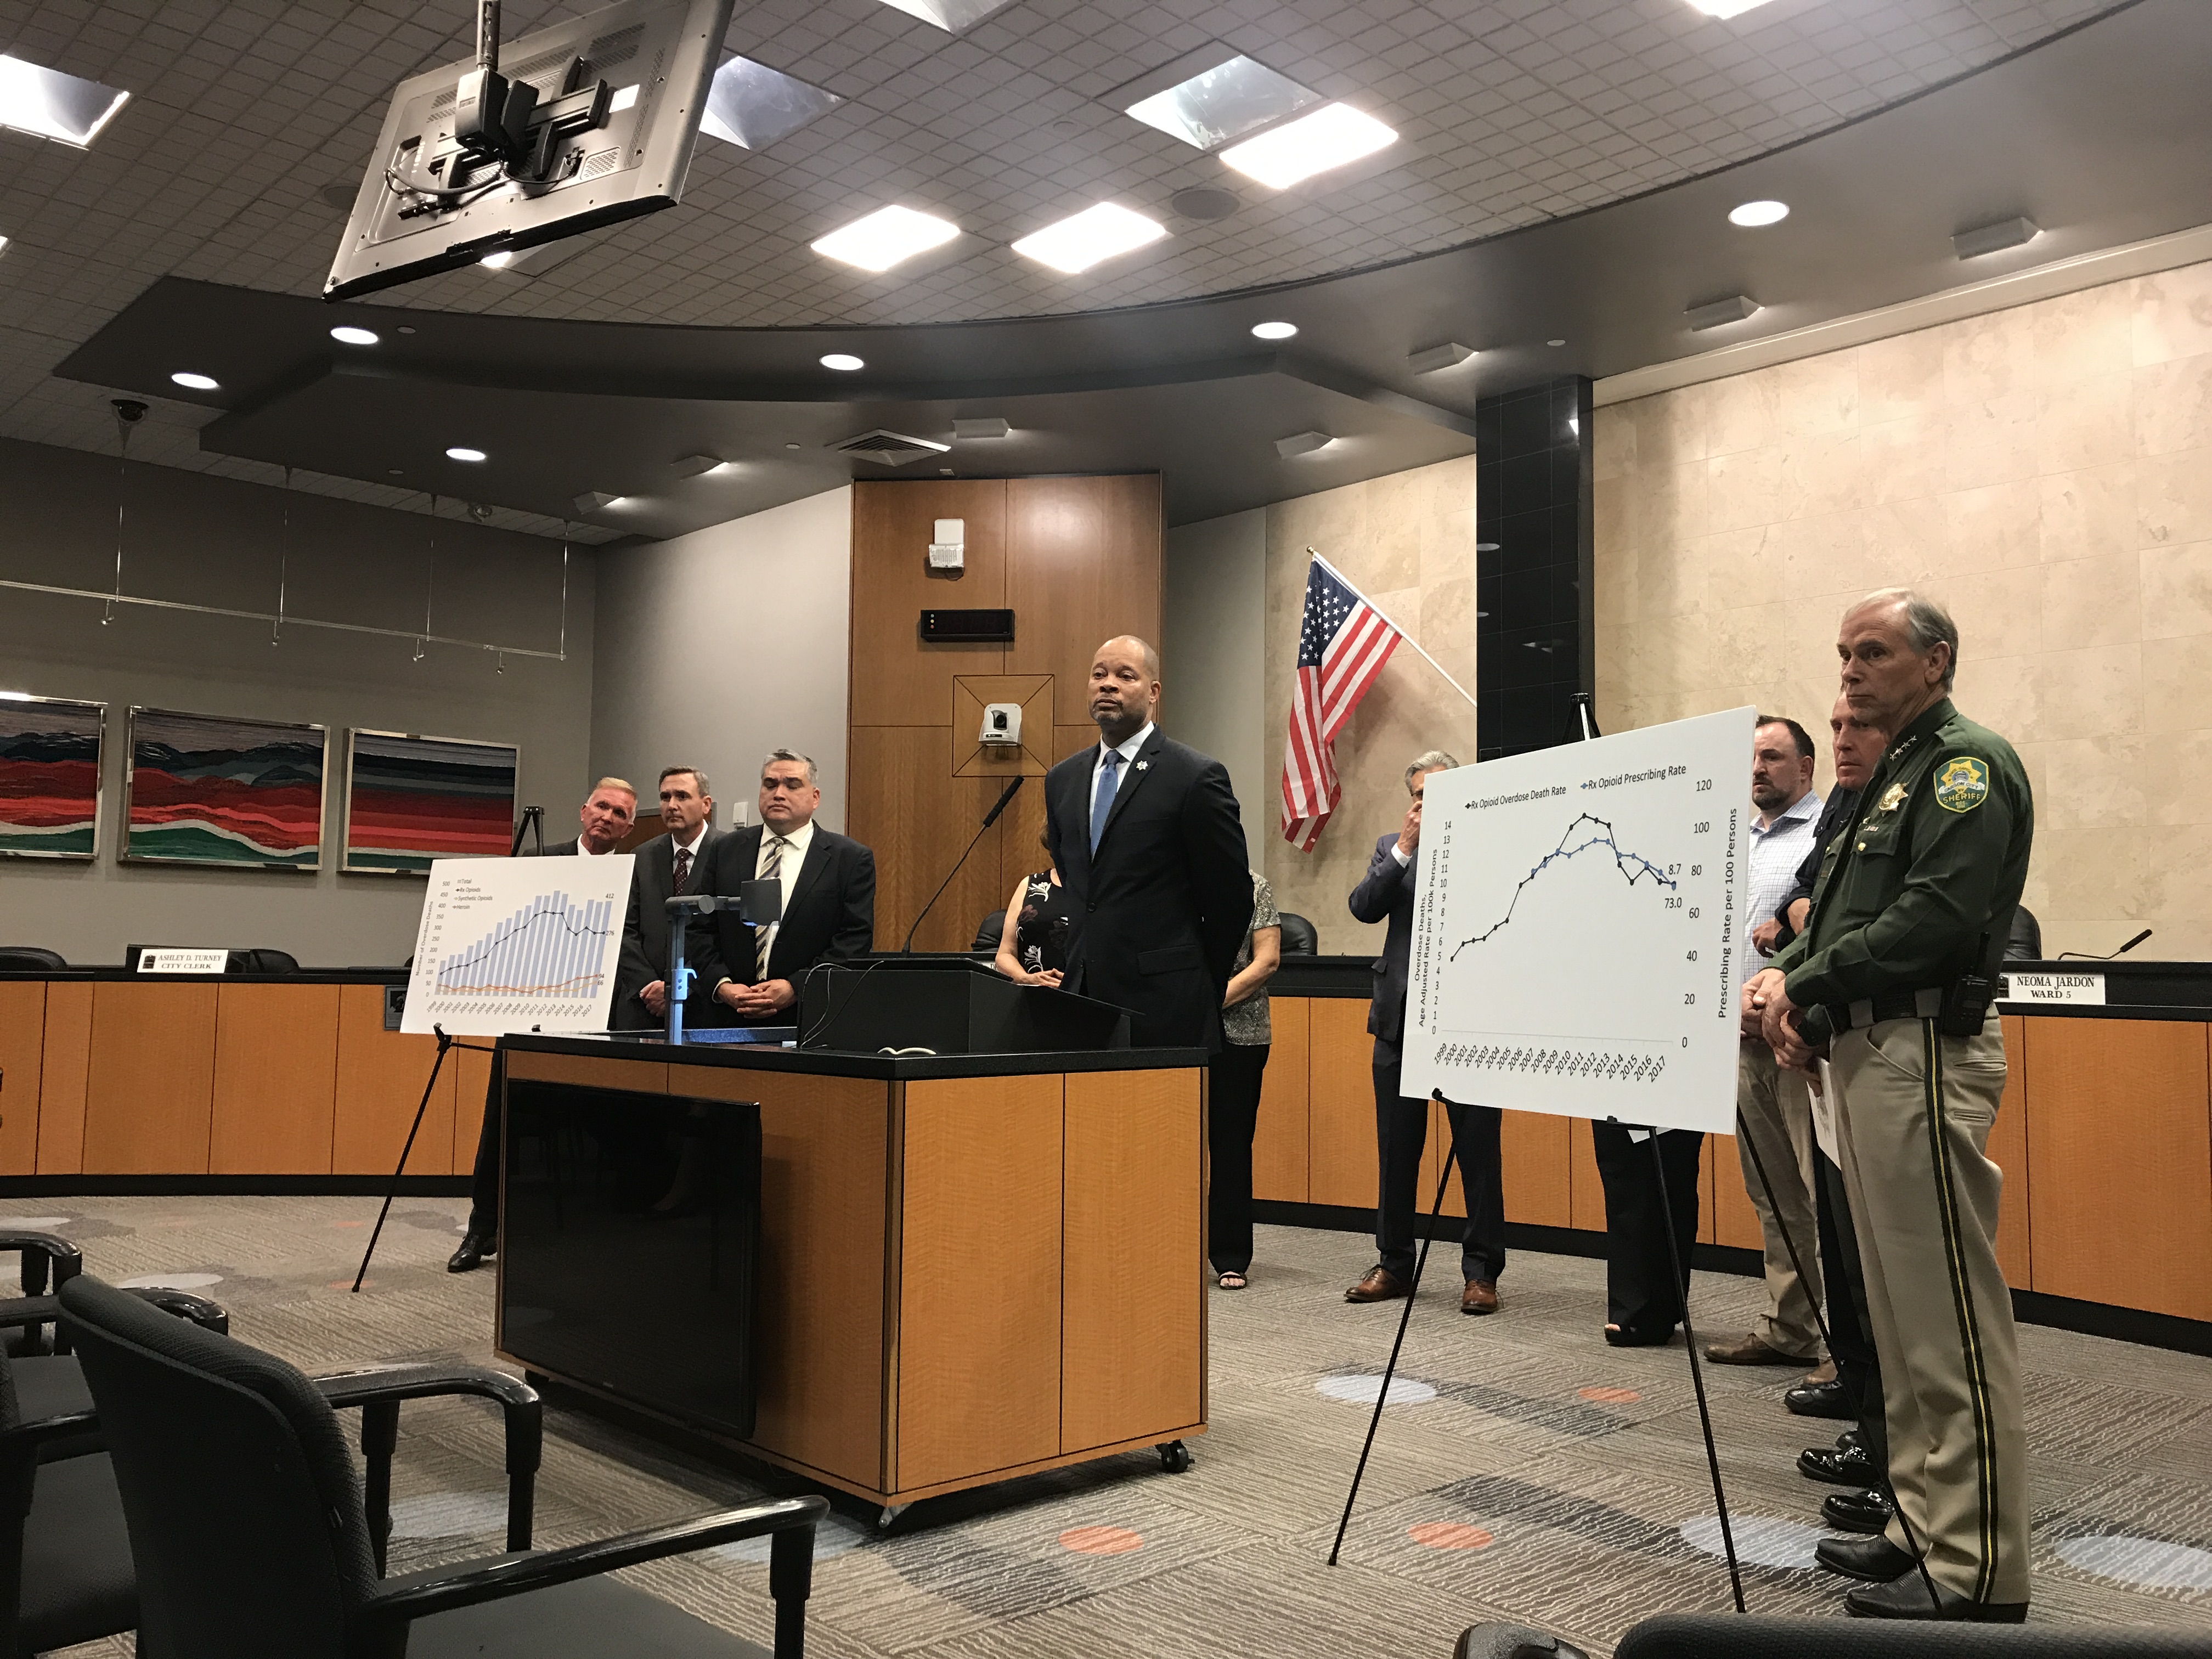 Attorney General Aaron Ford at a Reno press conference announcing the expanded complaint against opioid manufacturers, distributors, pharmacies and individuals.